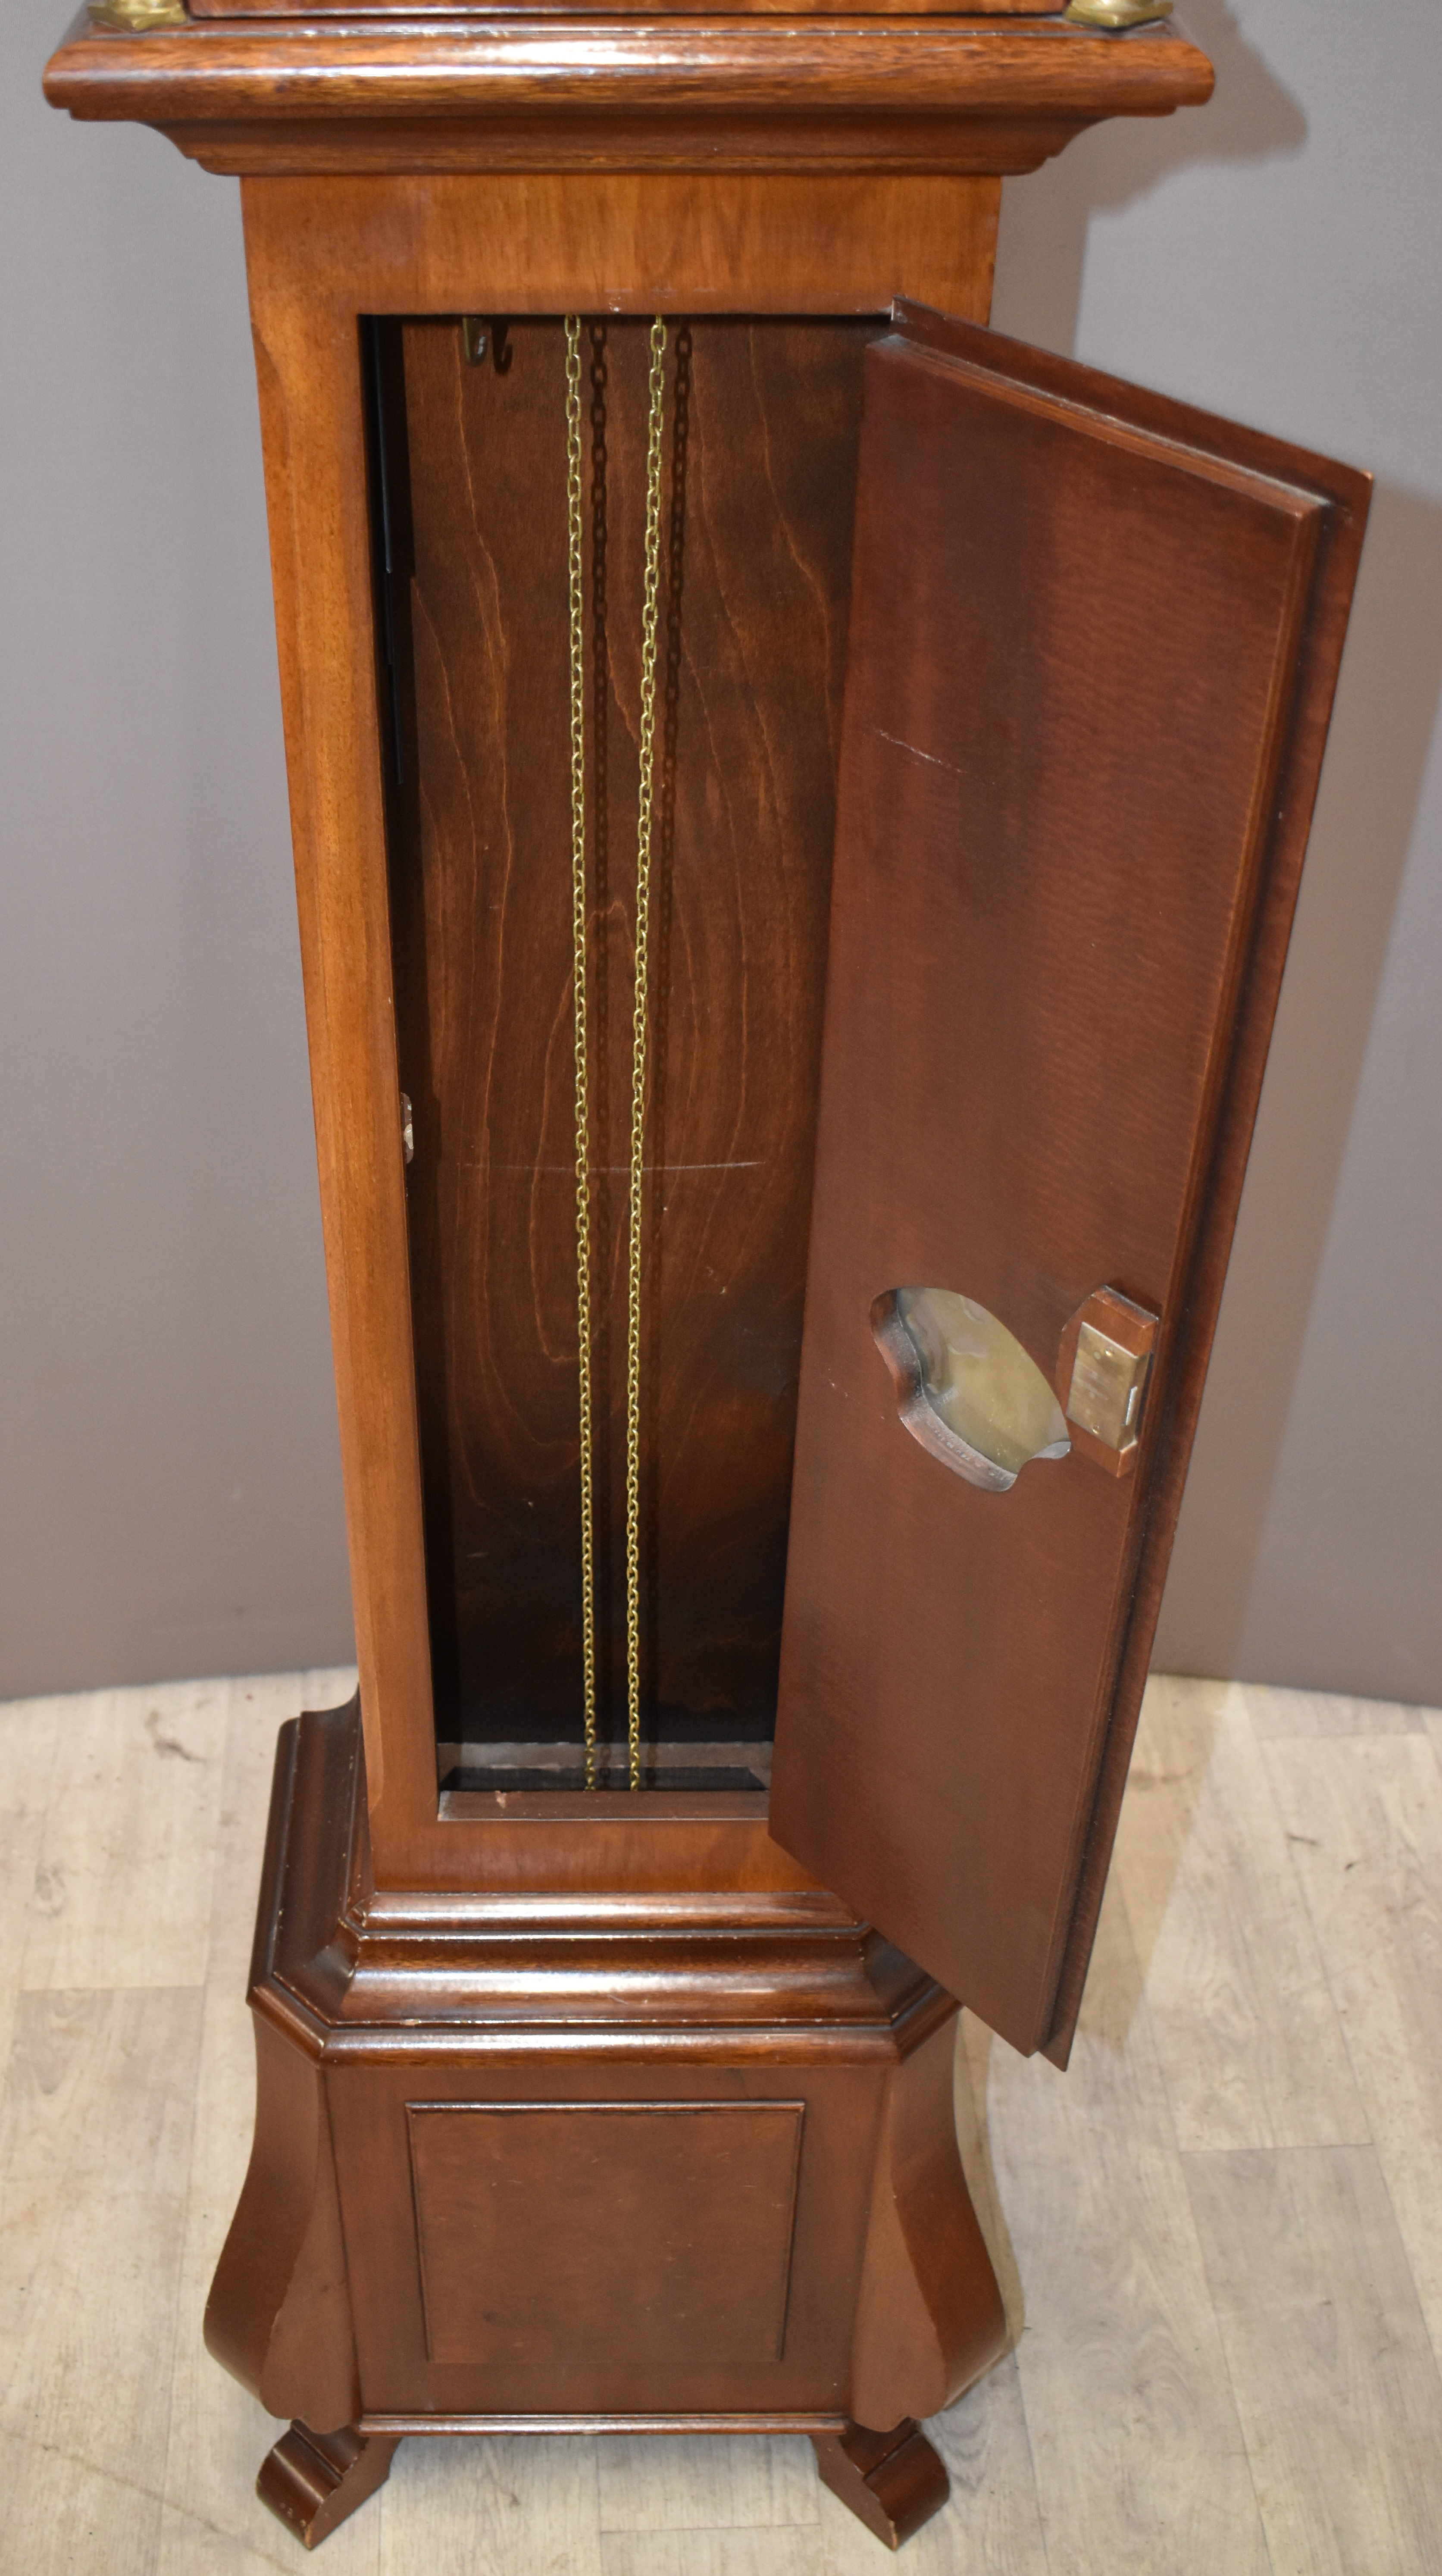 Walnut cased grandmother clock with figural decoration, moonphase, date and J M Verbrugge, Amsterdam - Image 4 of 5